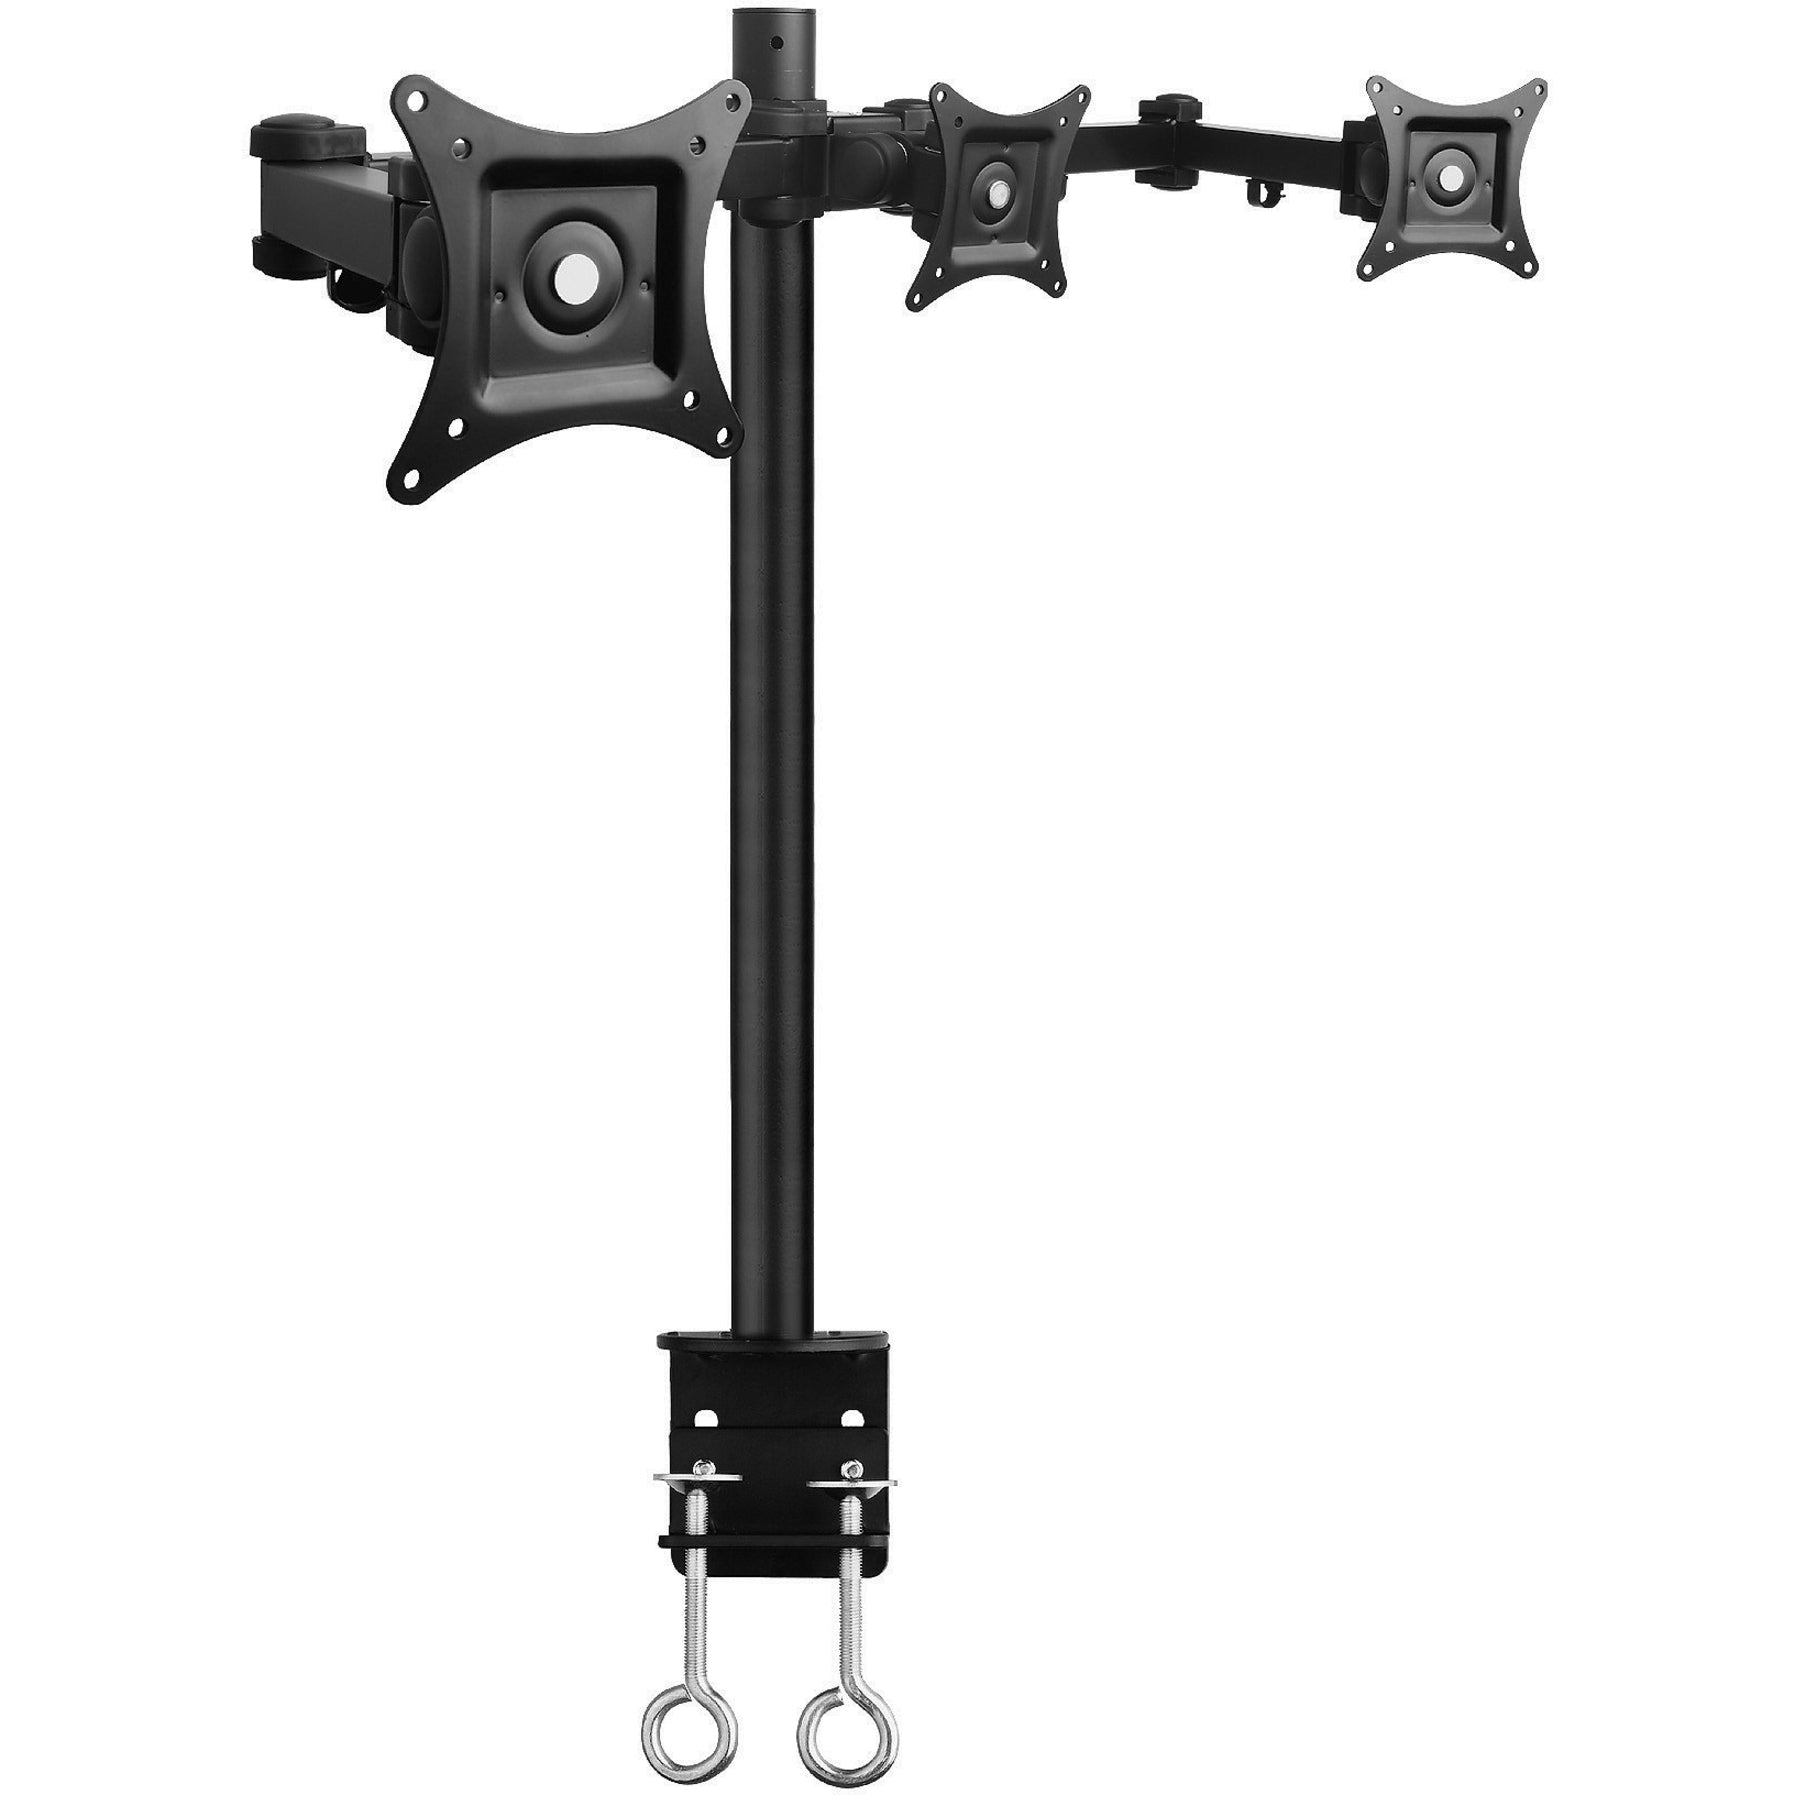 SIIG CE-MT0R12-S3 Articulating Triple Monitor Desk Mount - 13" to 27", 66 lb Load Capacity, Steel, Black